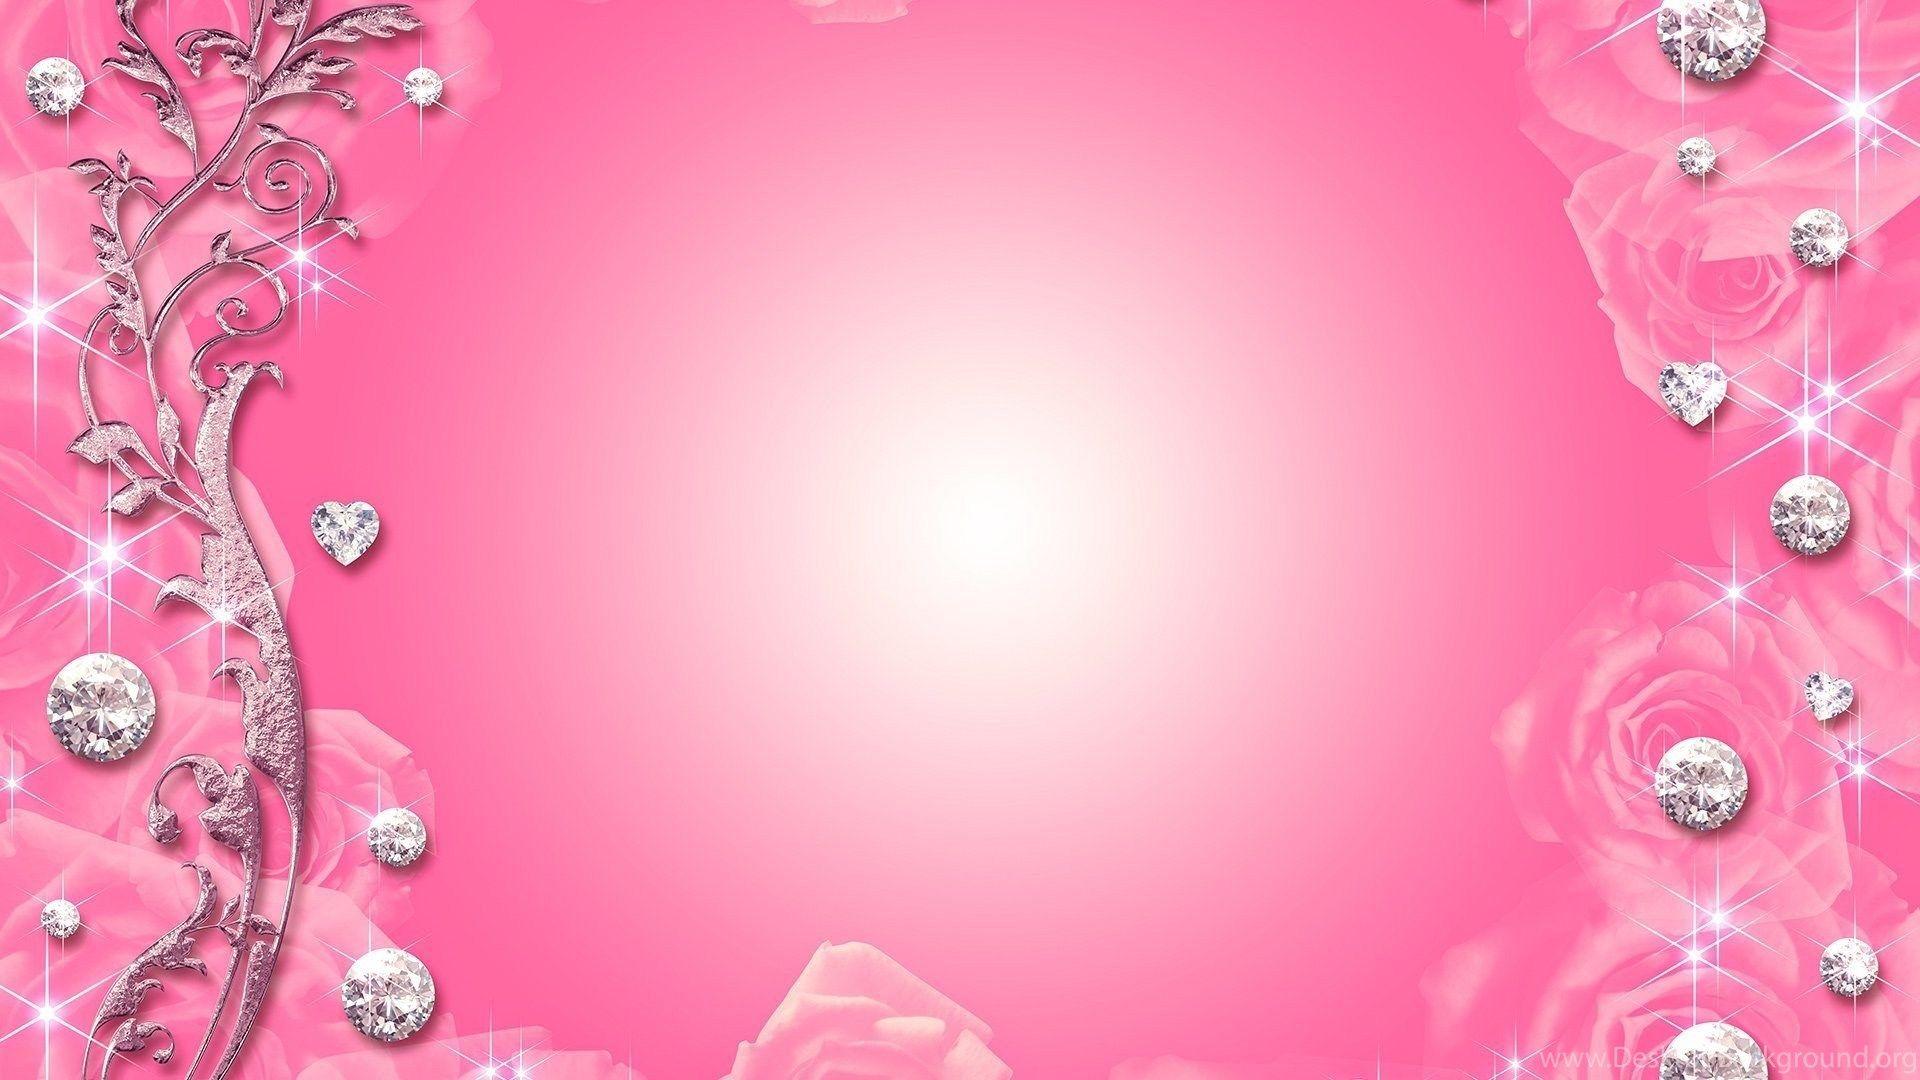 barbie background pink wallpaper 10. Background Check All